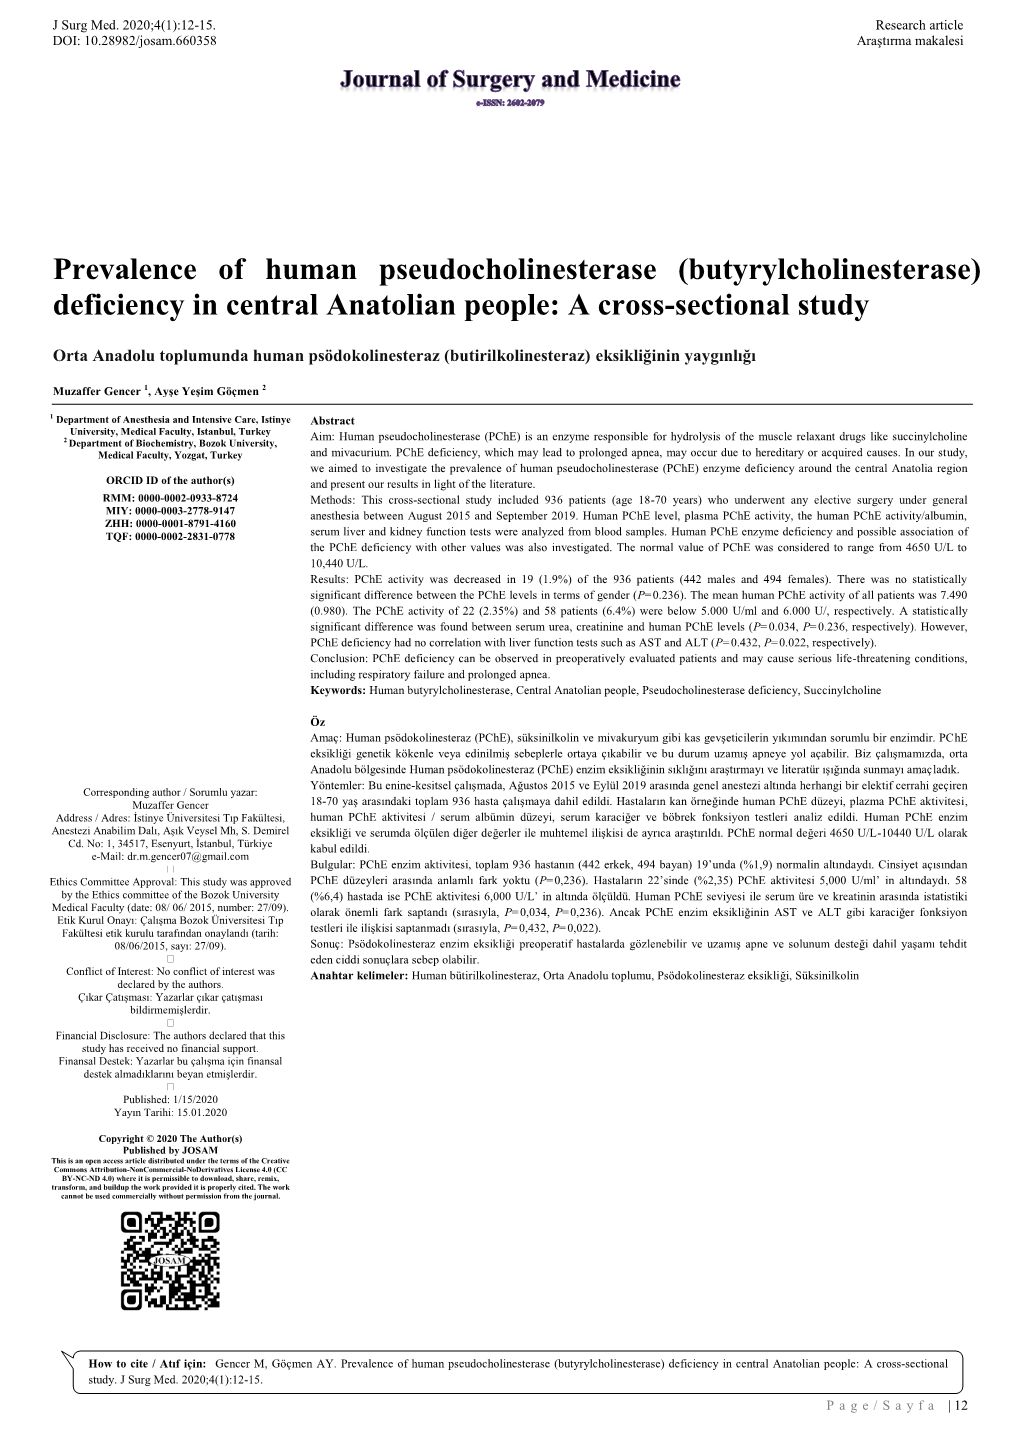 Butyrylcholinesterase) Deficiency in Central Anatolian People: a Cross-Sectional Study